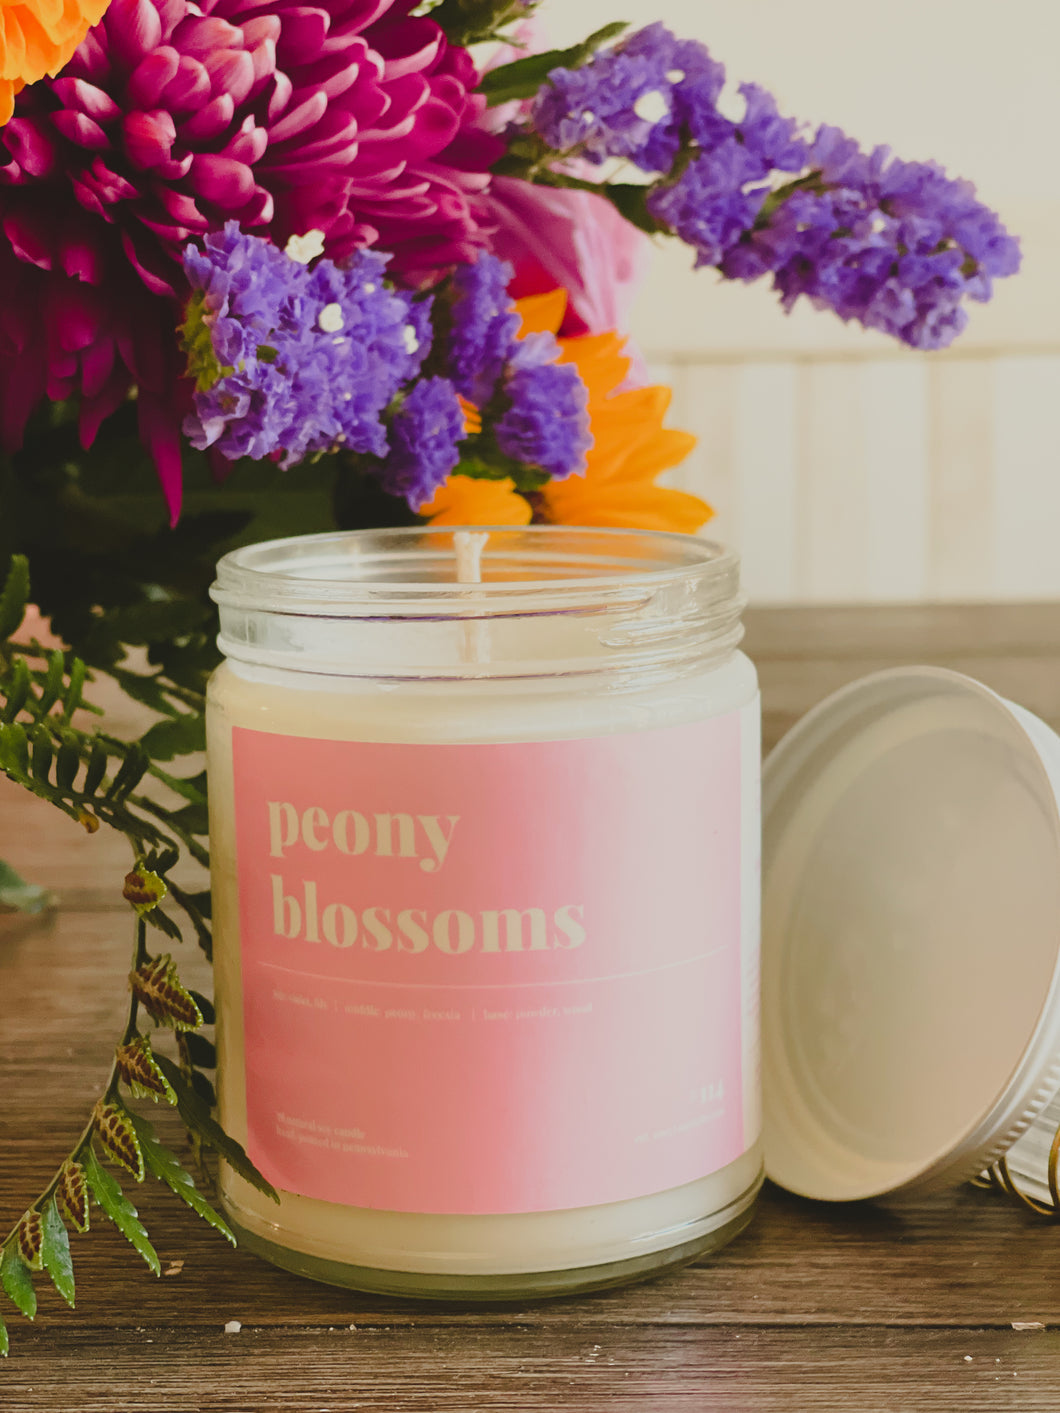 Peony Blossoms Soy Candle